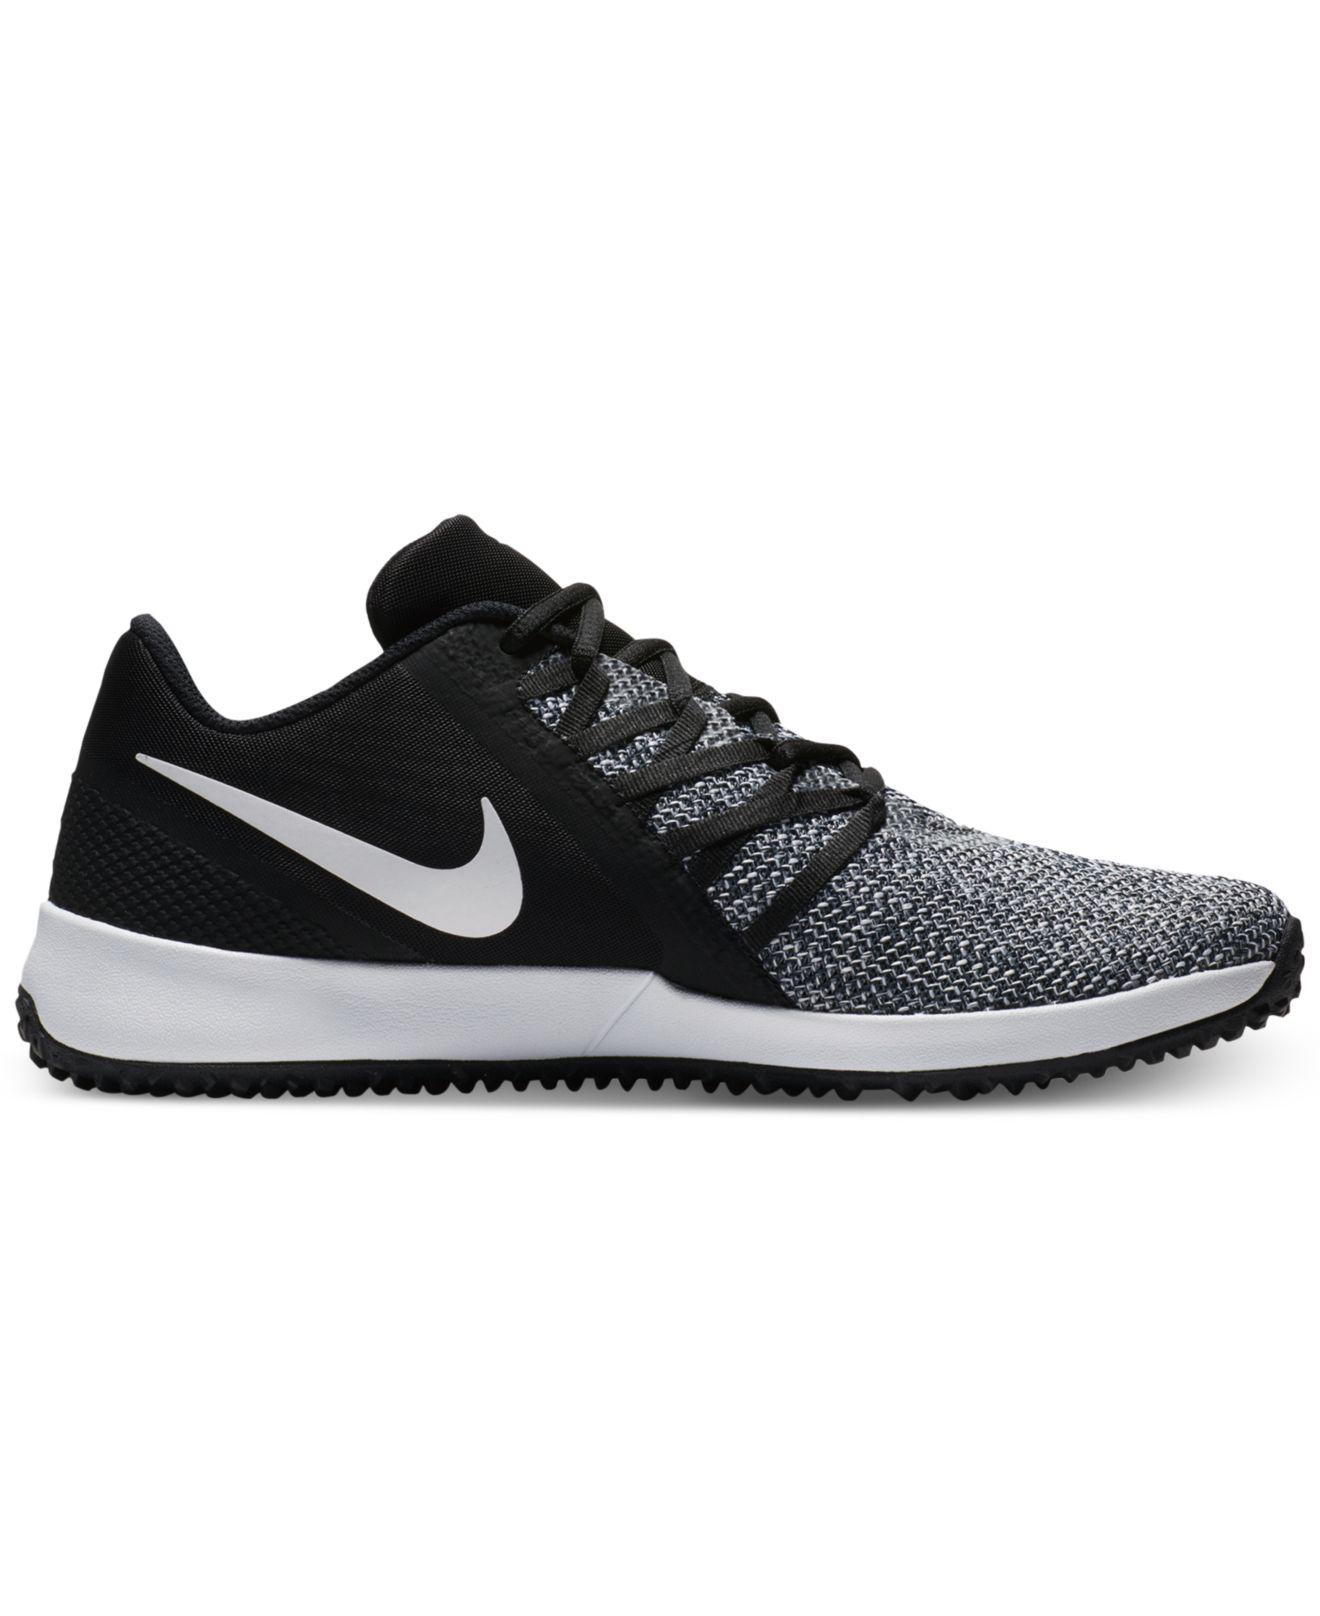 men's nike varsity compete trainer training shoes